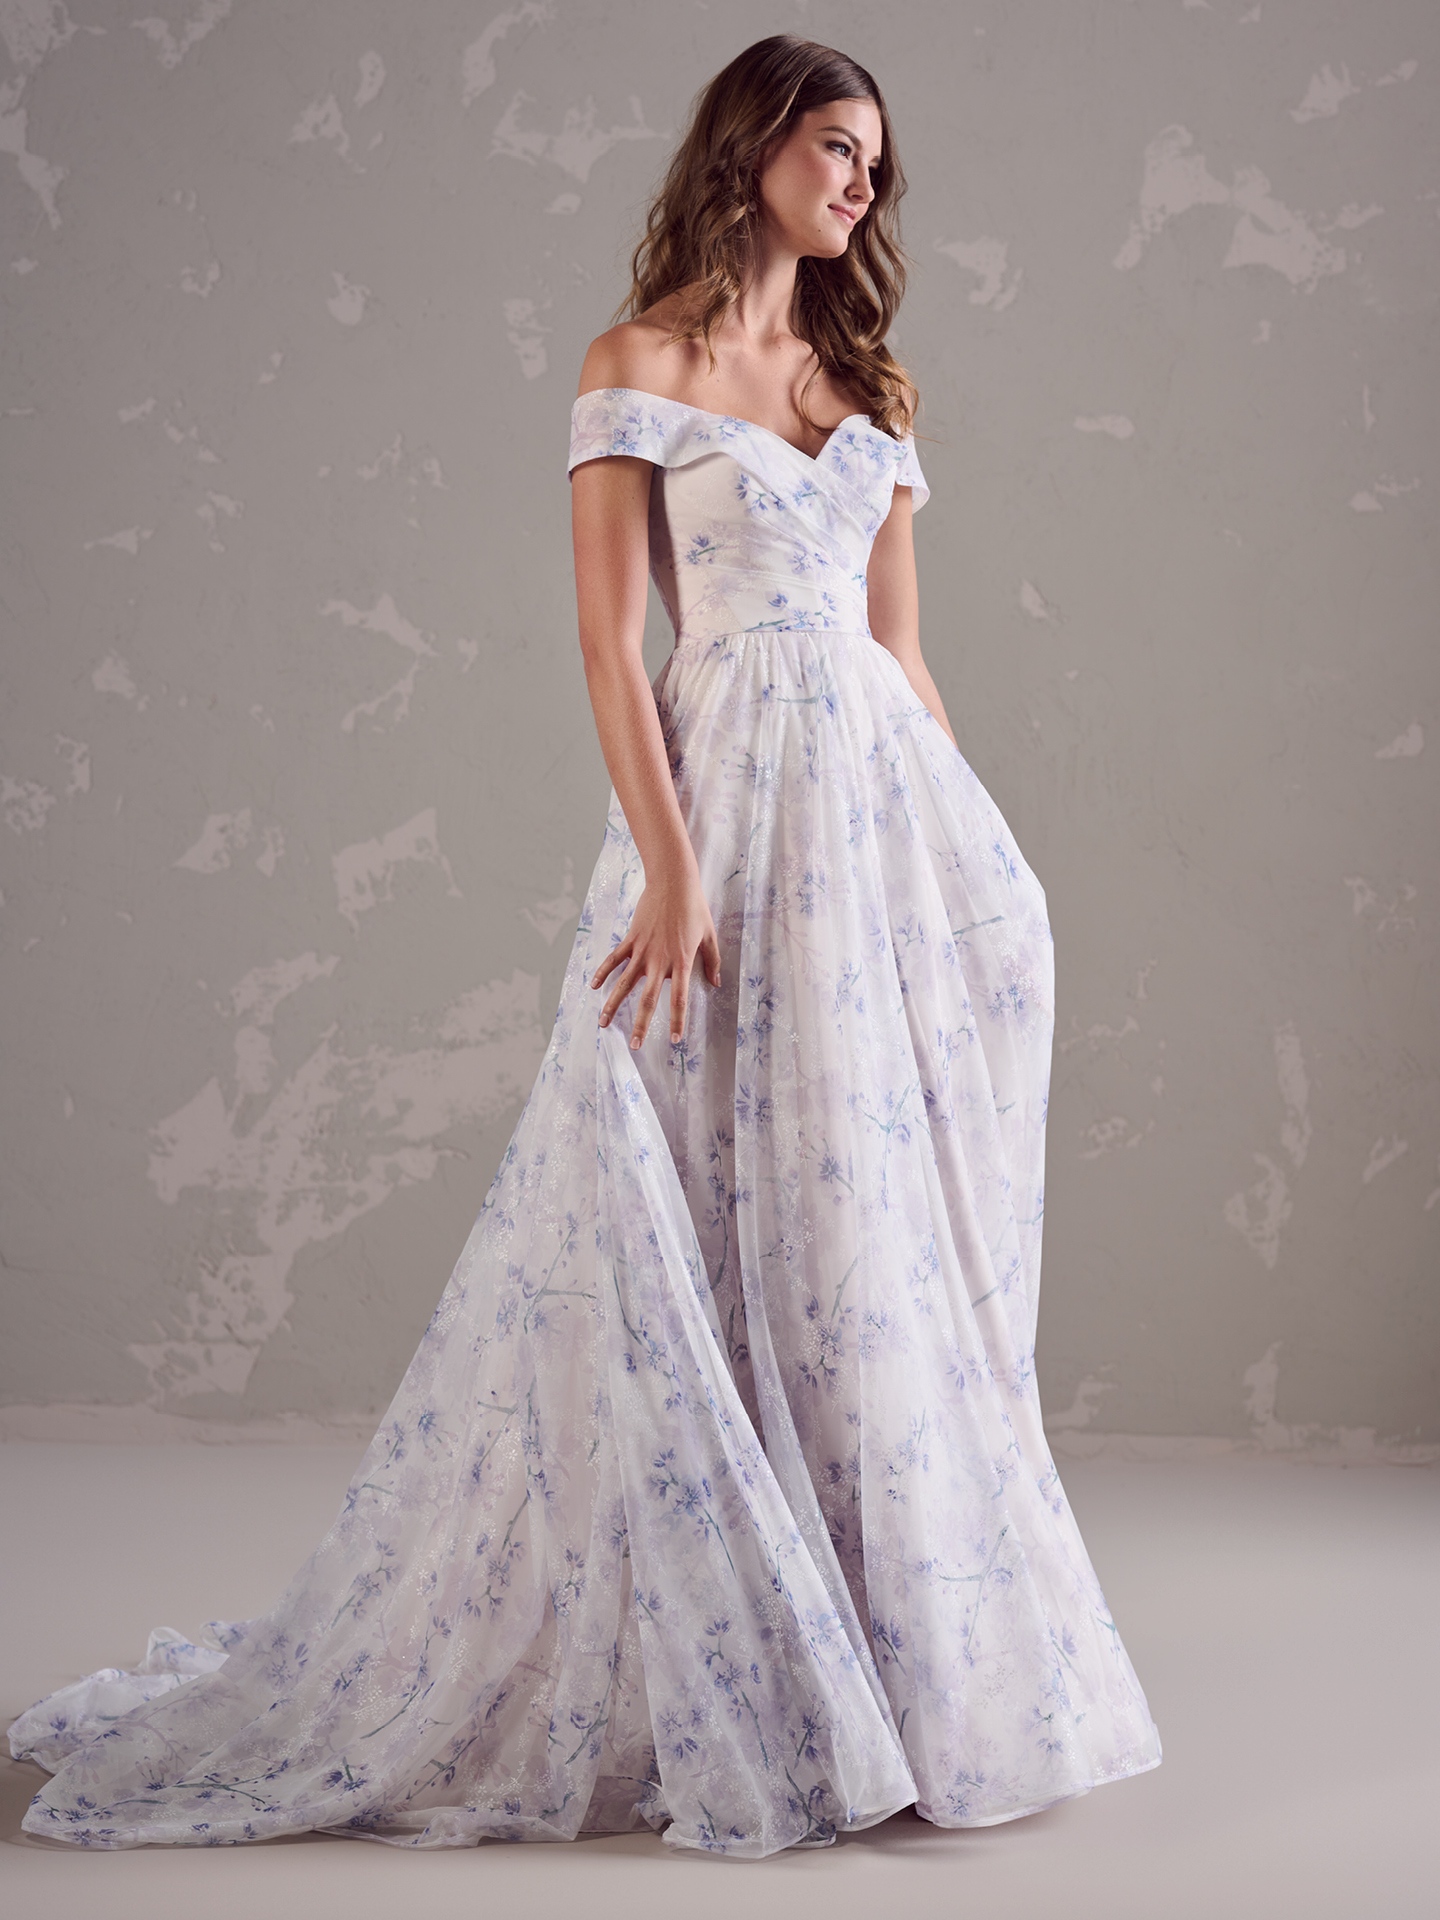 'Boho Luxe' starts with an irresistible silhouette and unexpected flourish. This blue floral wedding dress has both these bases covered-and more. Available in Blue Floral only and sizes UK2-UK30